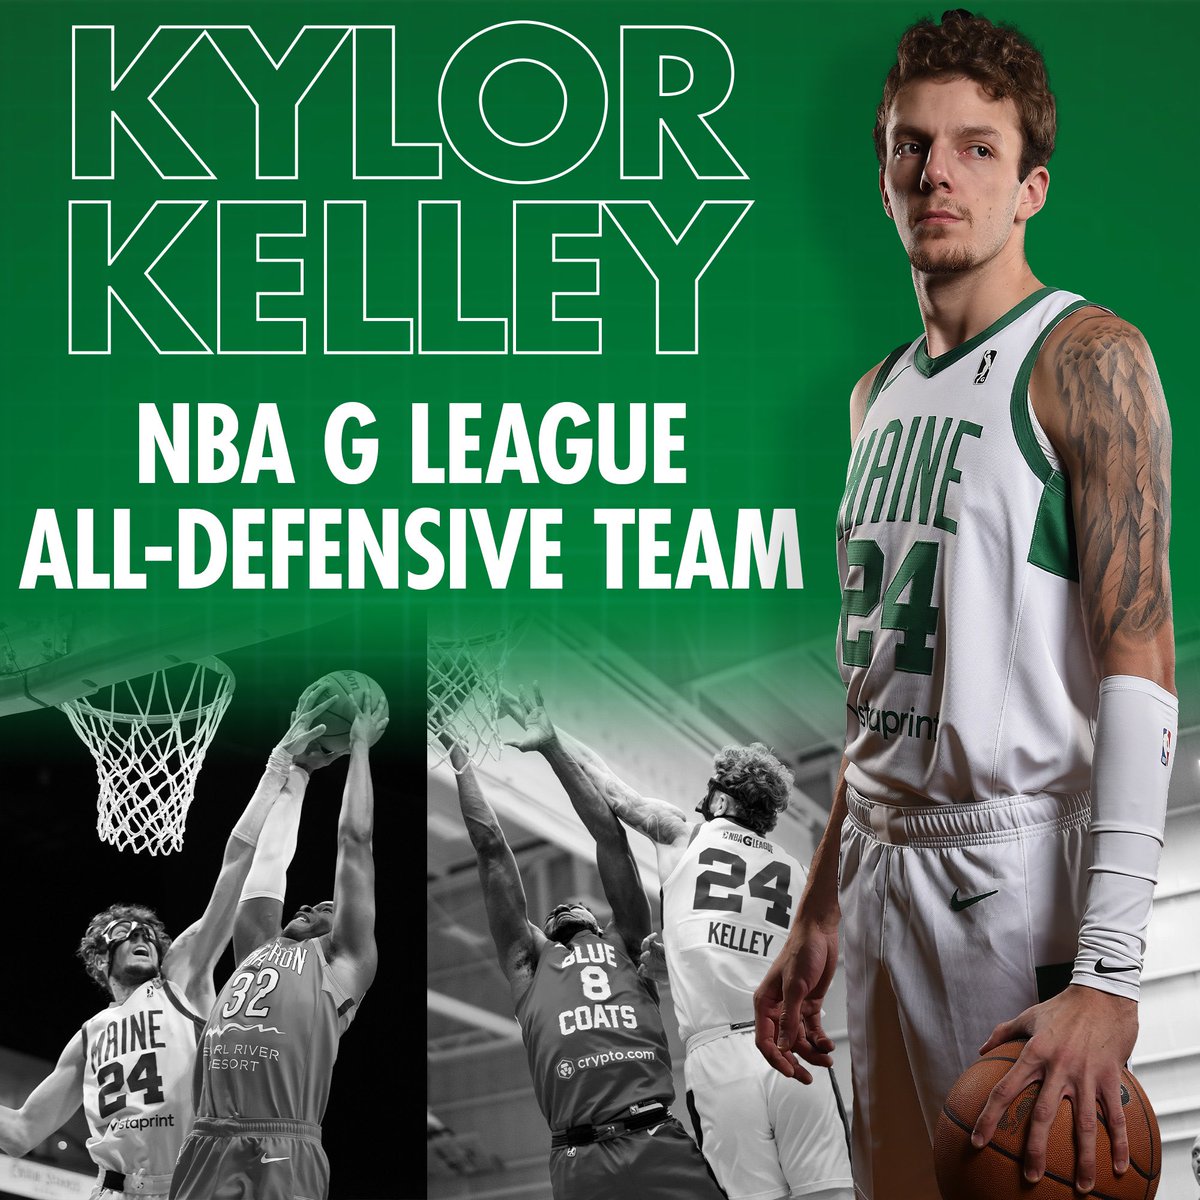 ☘️ Congrats to @jddavison10 and @K3LL3Y24 for earning All-NBA G League honors. Read more with the link below. #bleedgreen maine.gleague.nba.com/news/all-g-lea…